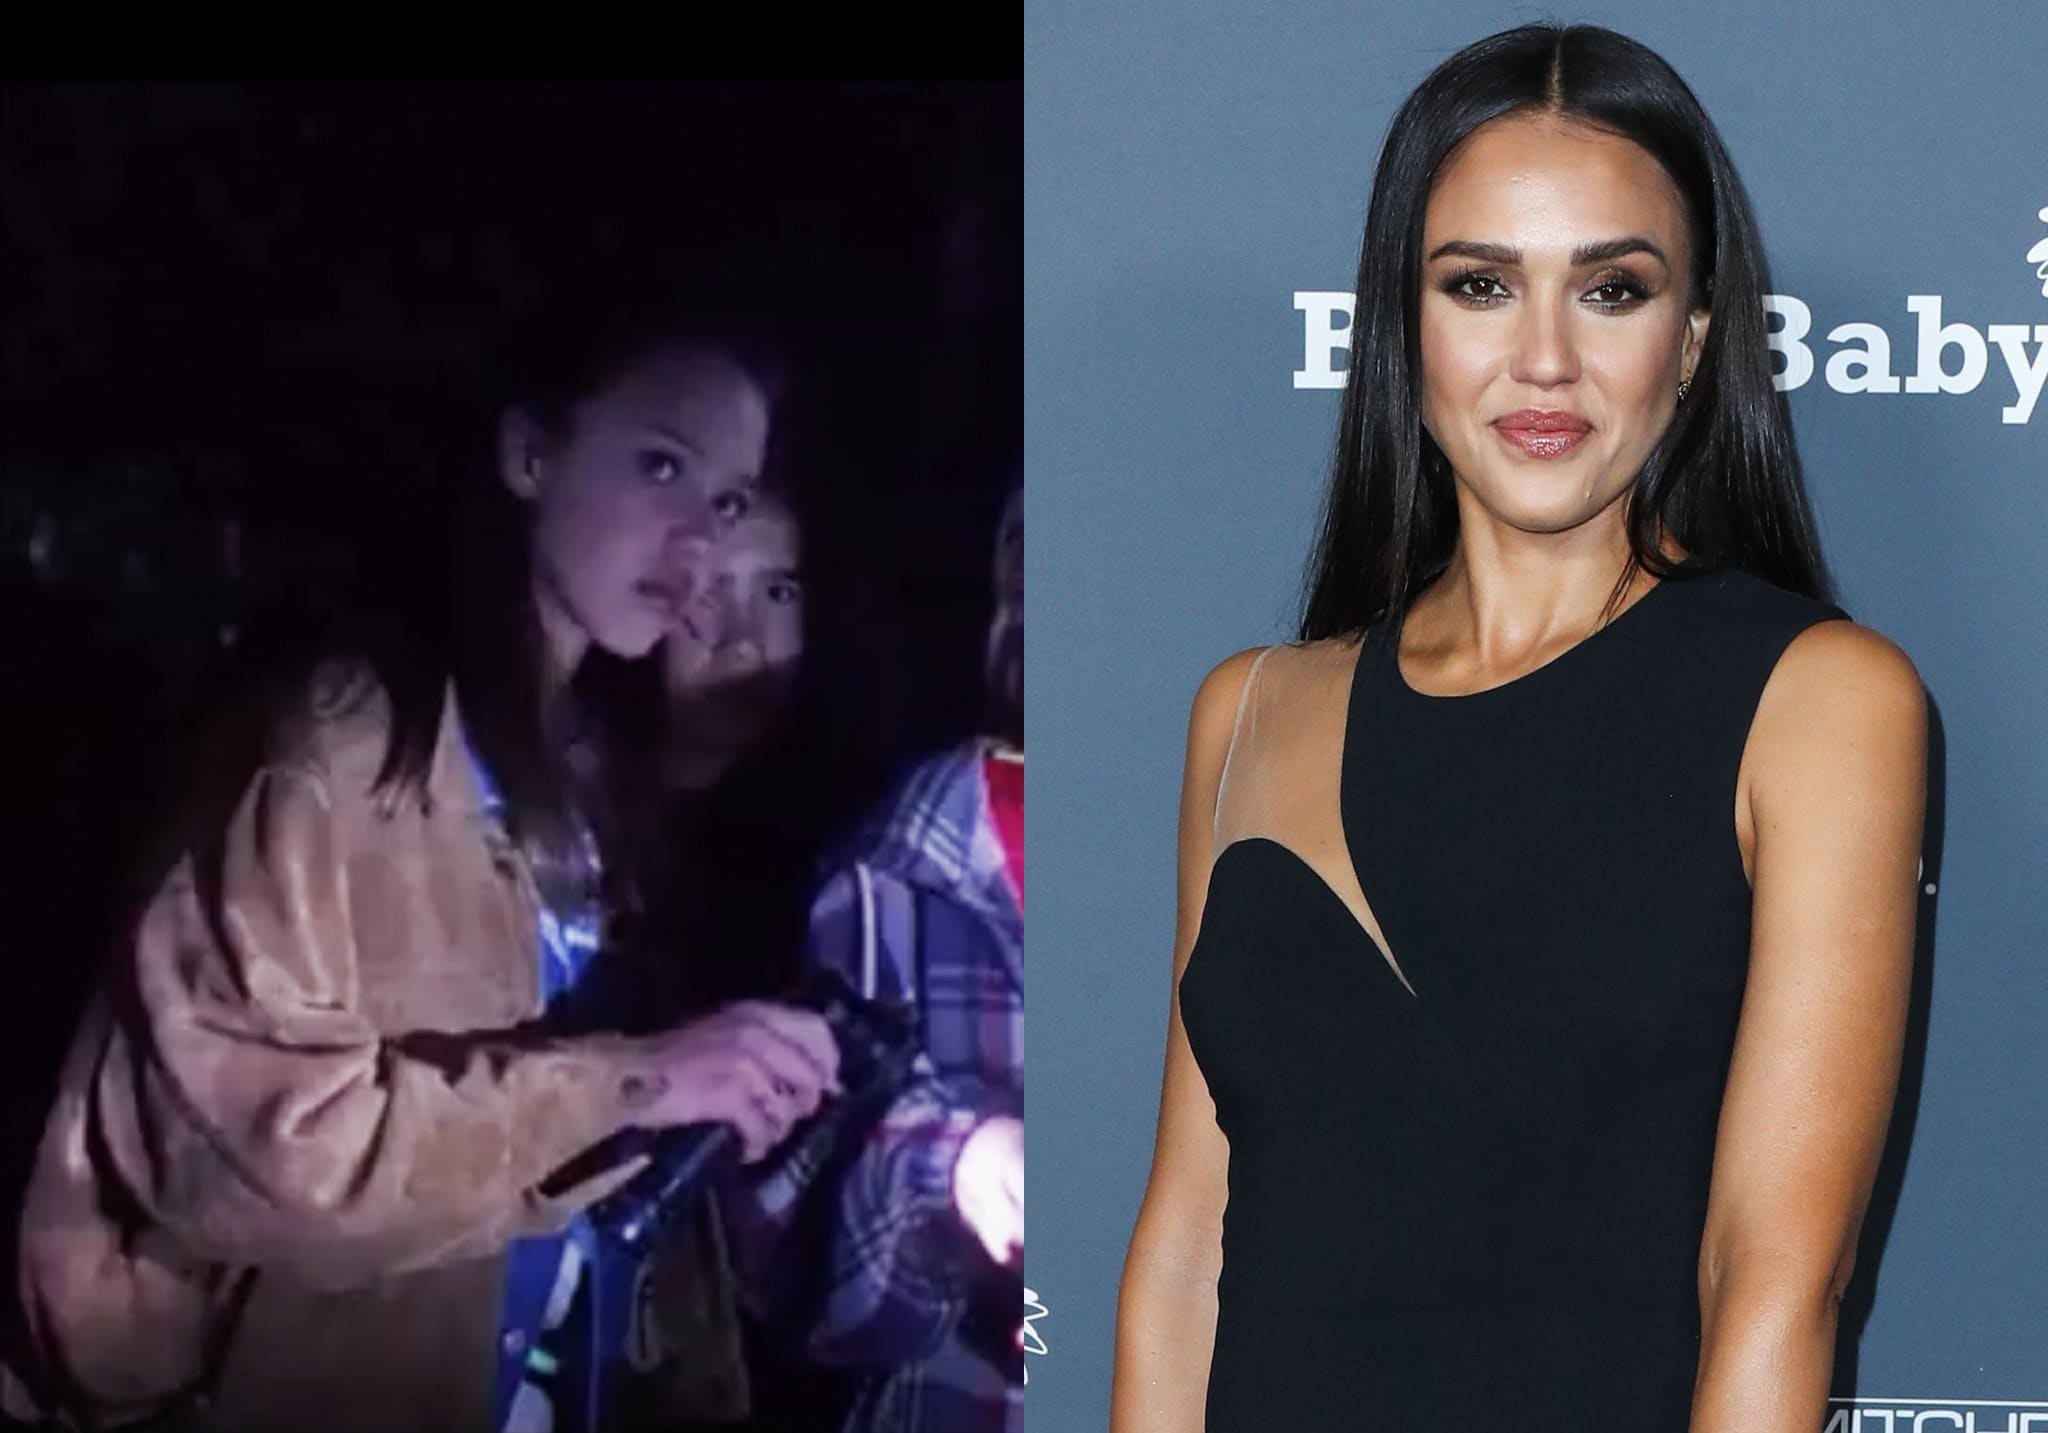 Jessica Alba made her movie debut at the age of 13 in Camp Nowhere